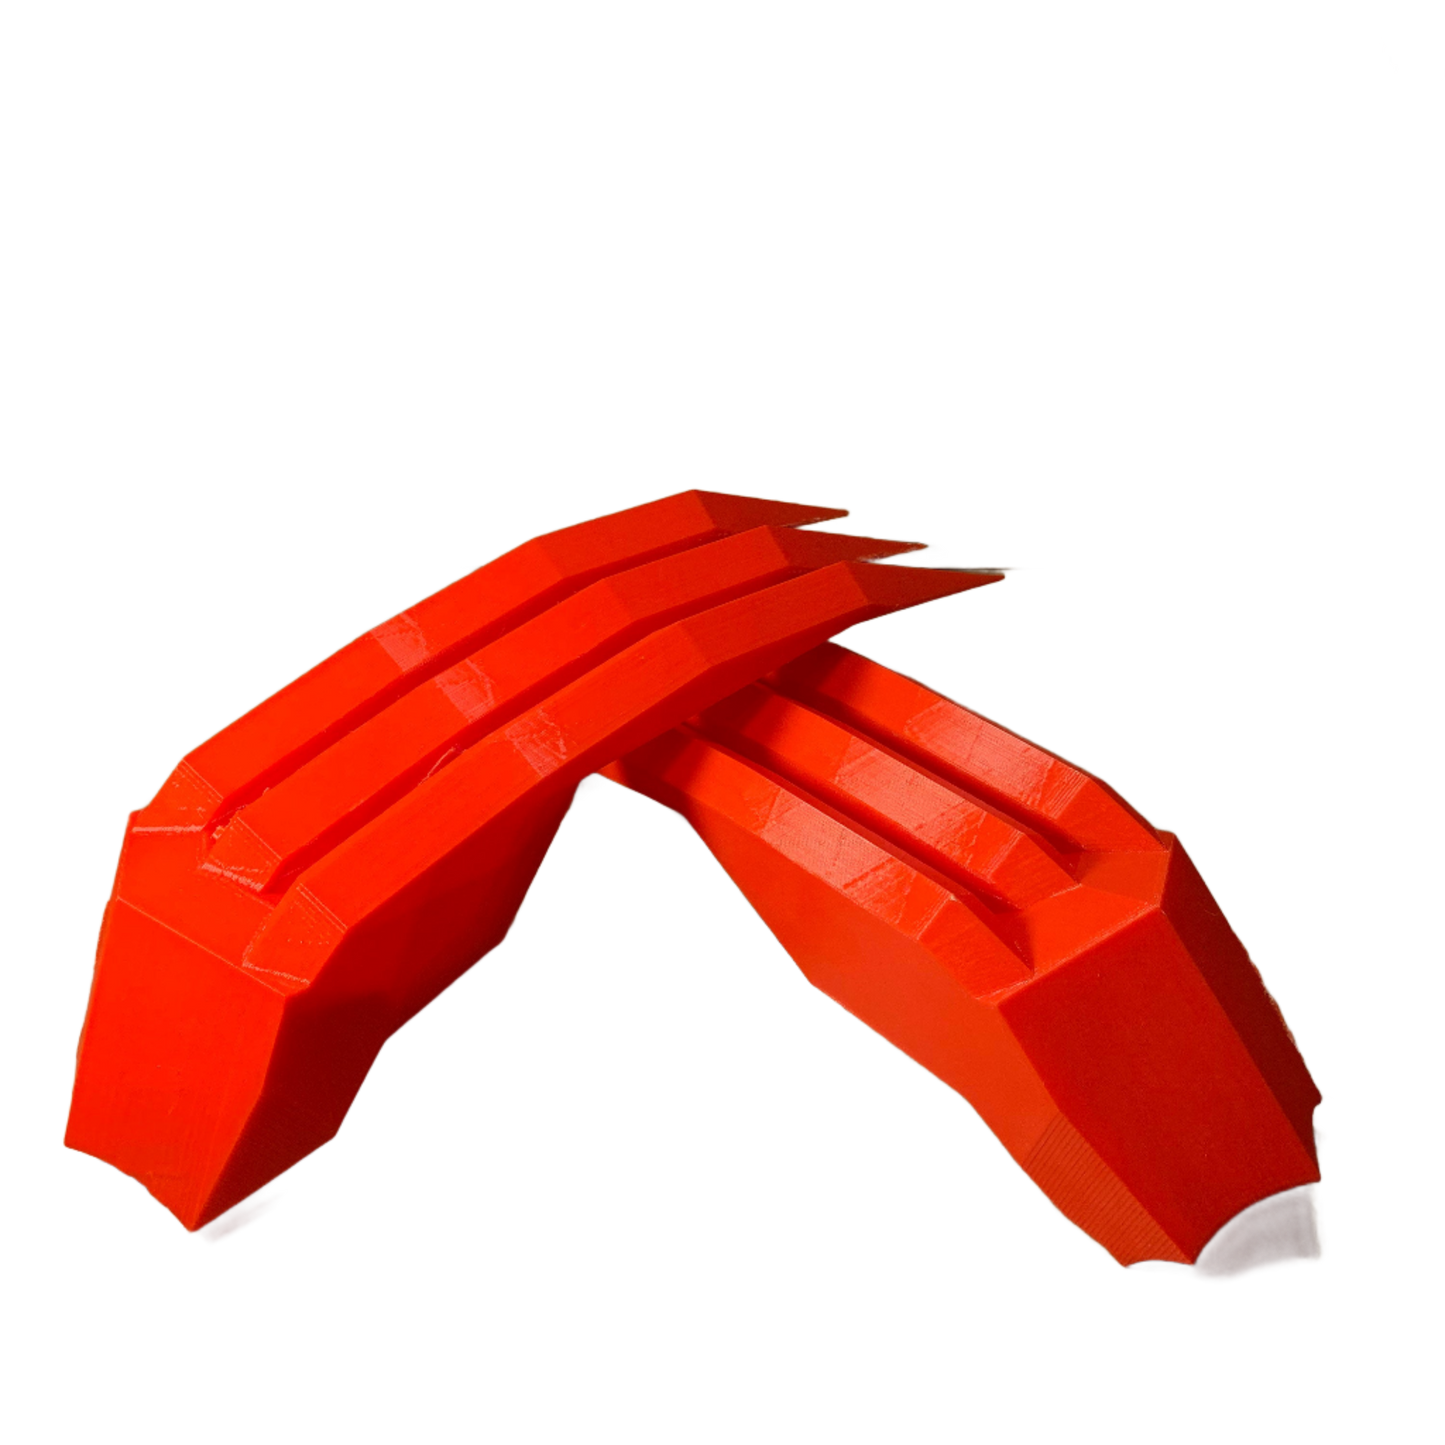 DRAGON CLAWS / OSRS Style Weapon / Life Size / rpg Closplay / Runescape Costume / Full Scale Game Weapon Gift